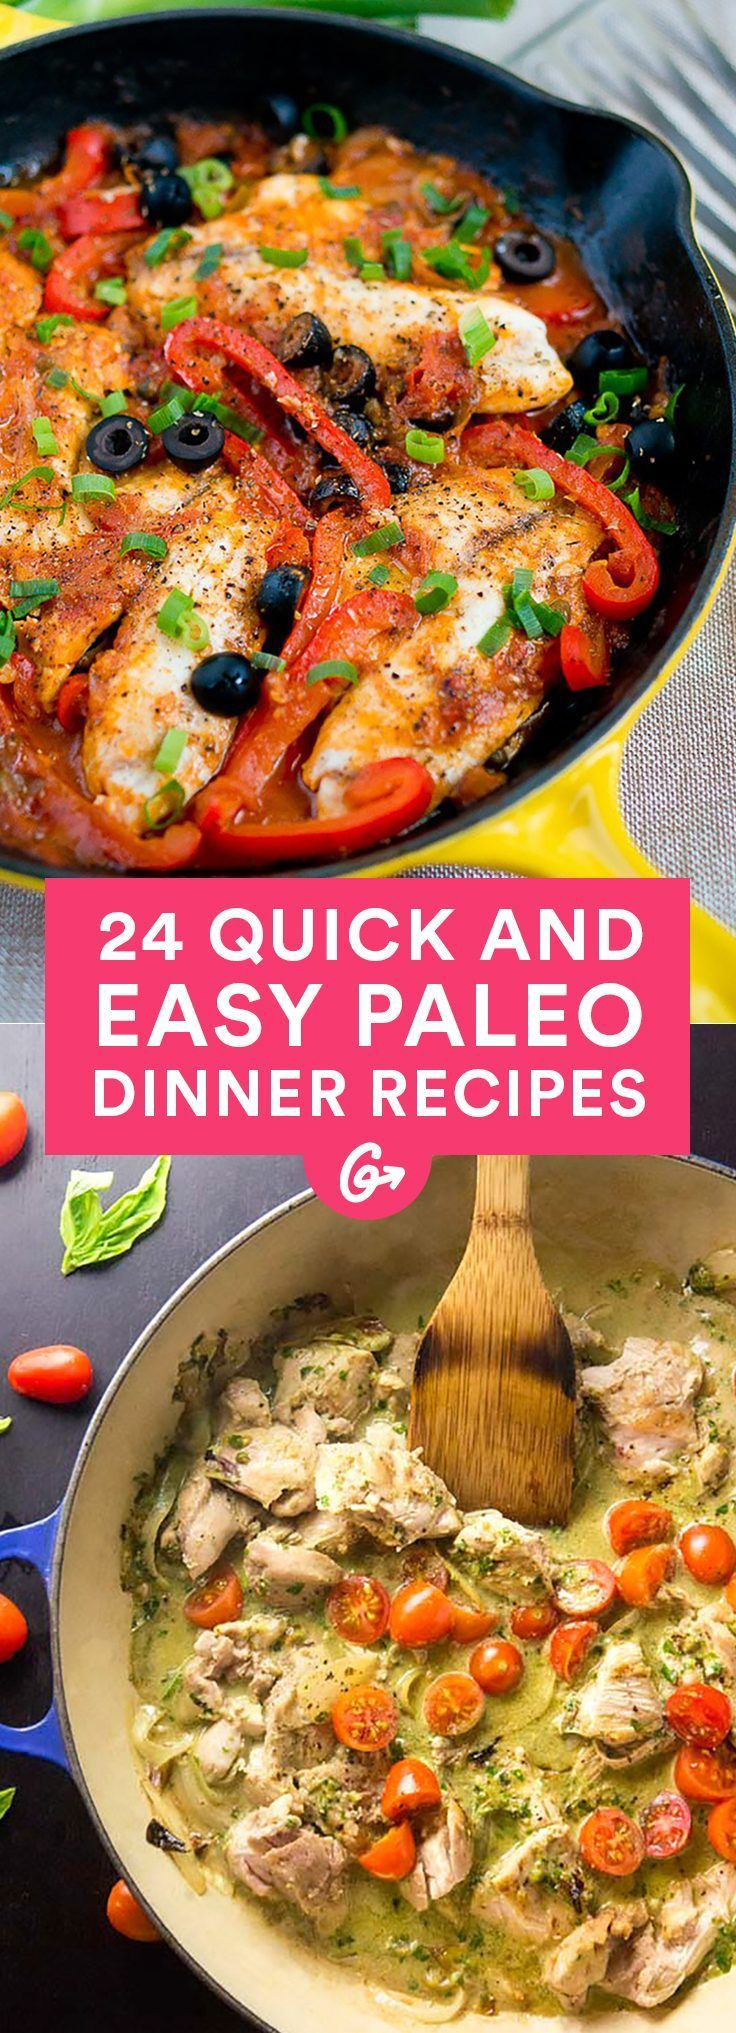 Healthy Paleo Dinners
 27 best images about Paleo on Pinterest